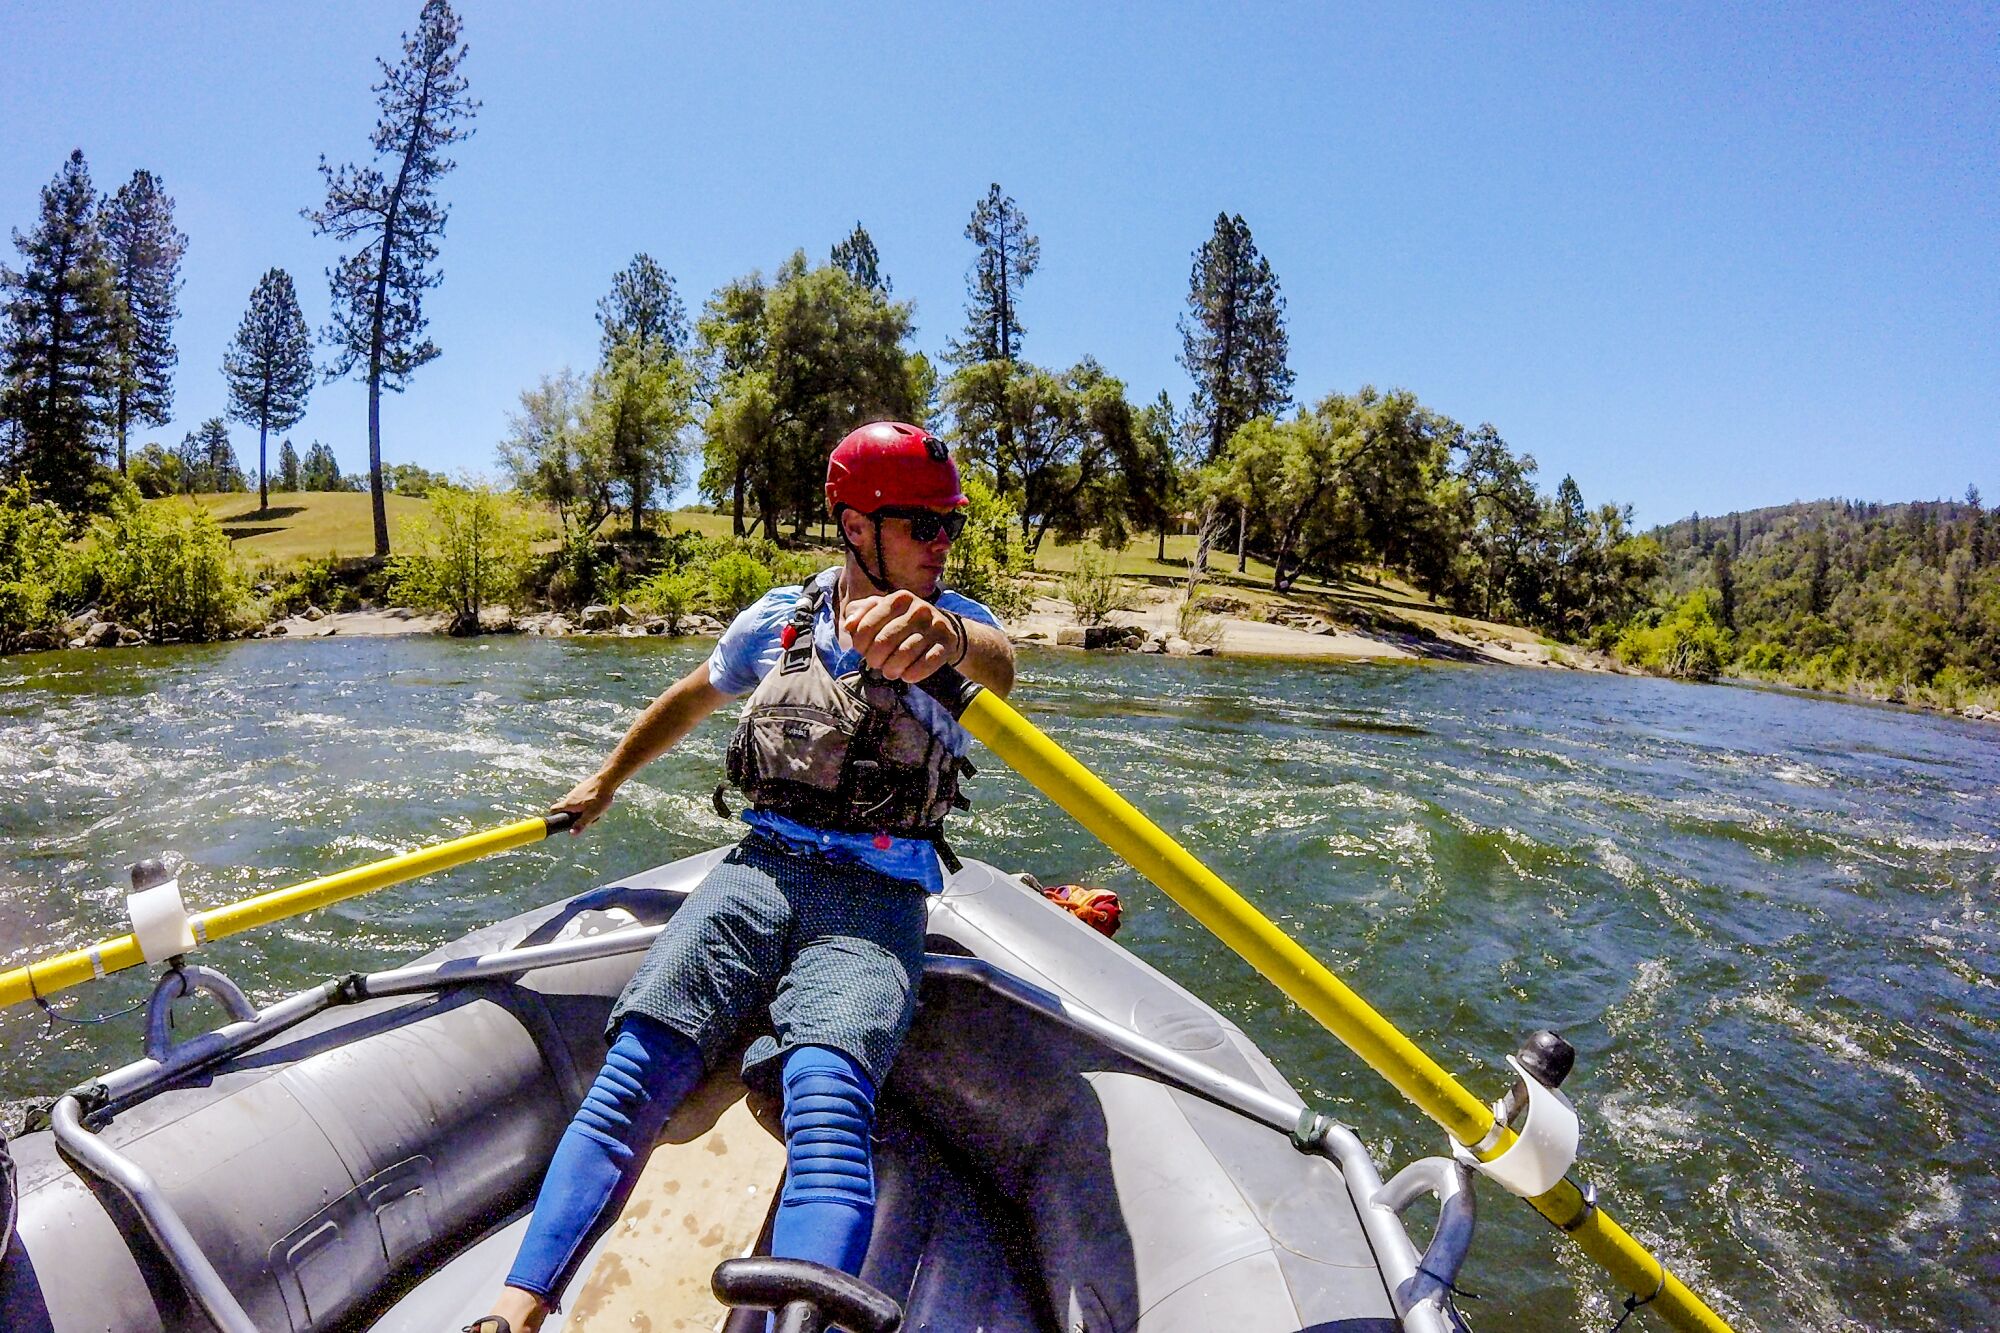 River guide Kyle Brazil uses oars to steer and propel an inflatable raft in the American River. 